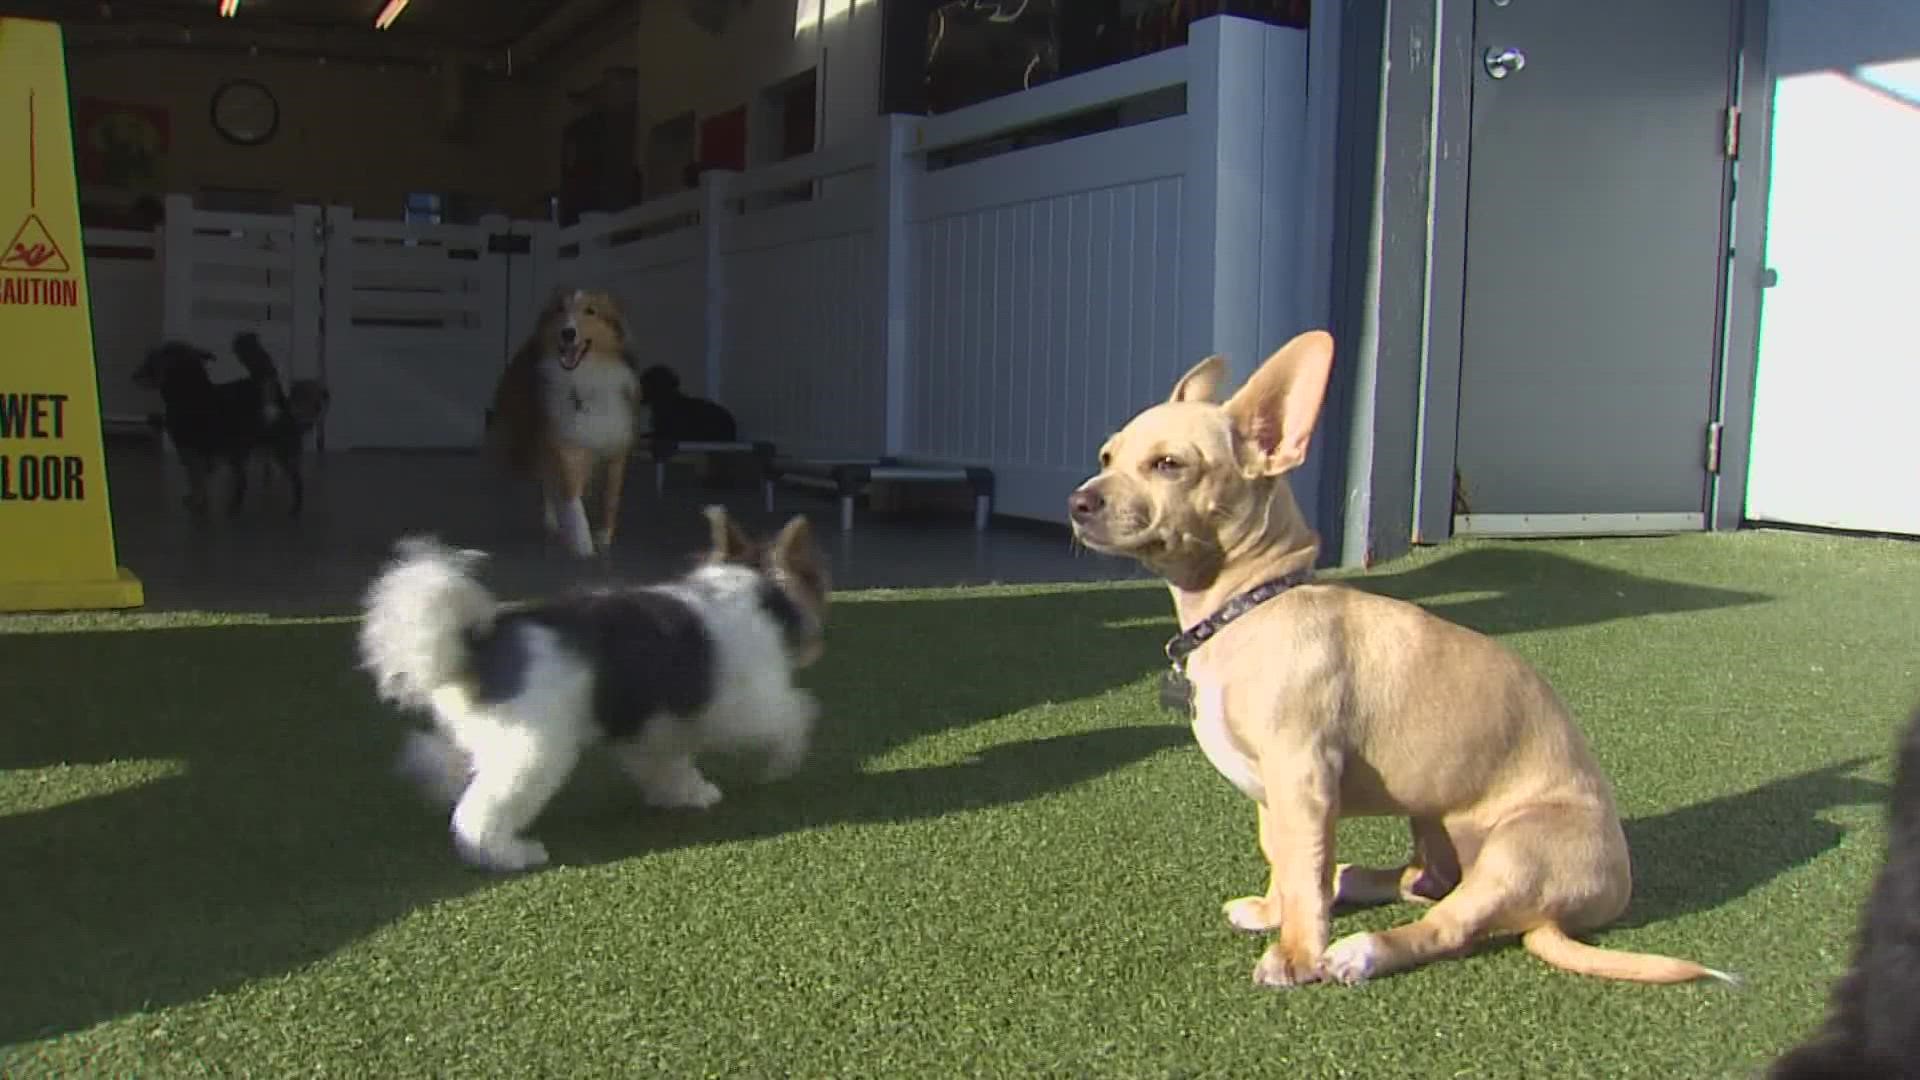 Staff shortages and increased demand due to pet owners returning to work have made finding doggie daycare appointments in western Washington a bit ruff.